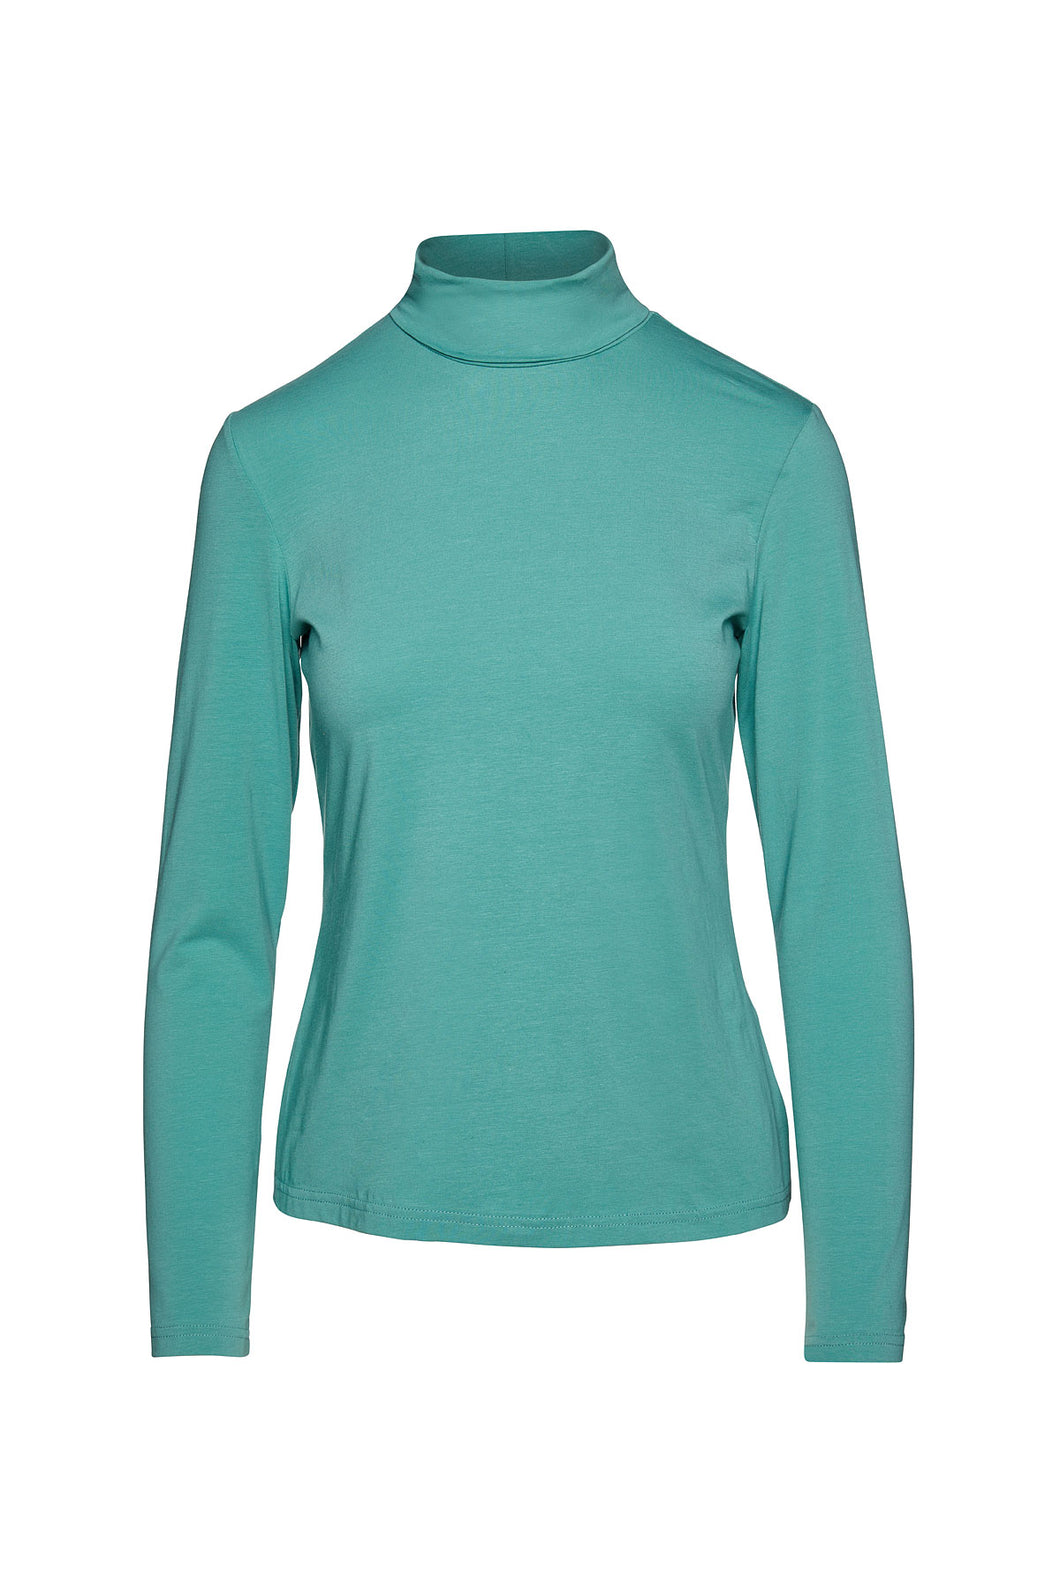 Light Green Turtle Neck Top in Sustainable Fabric